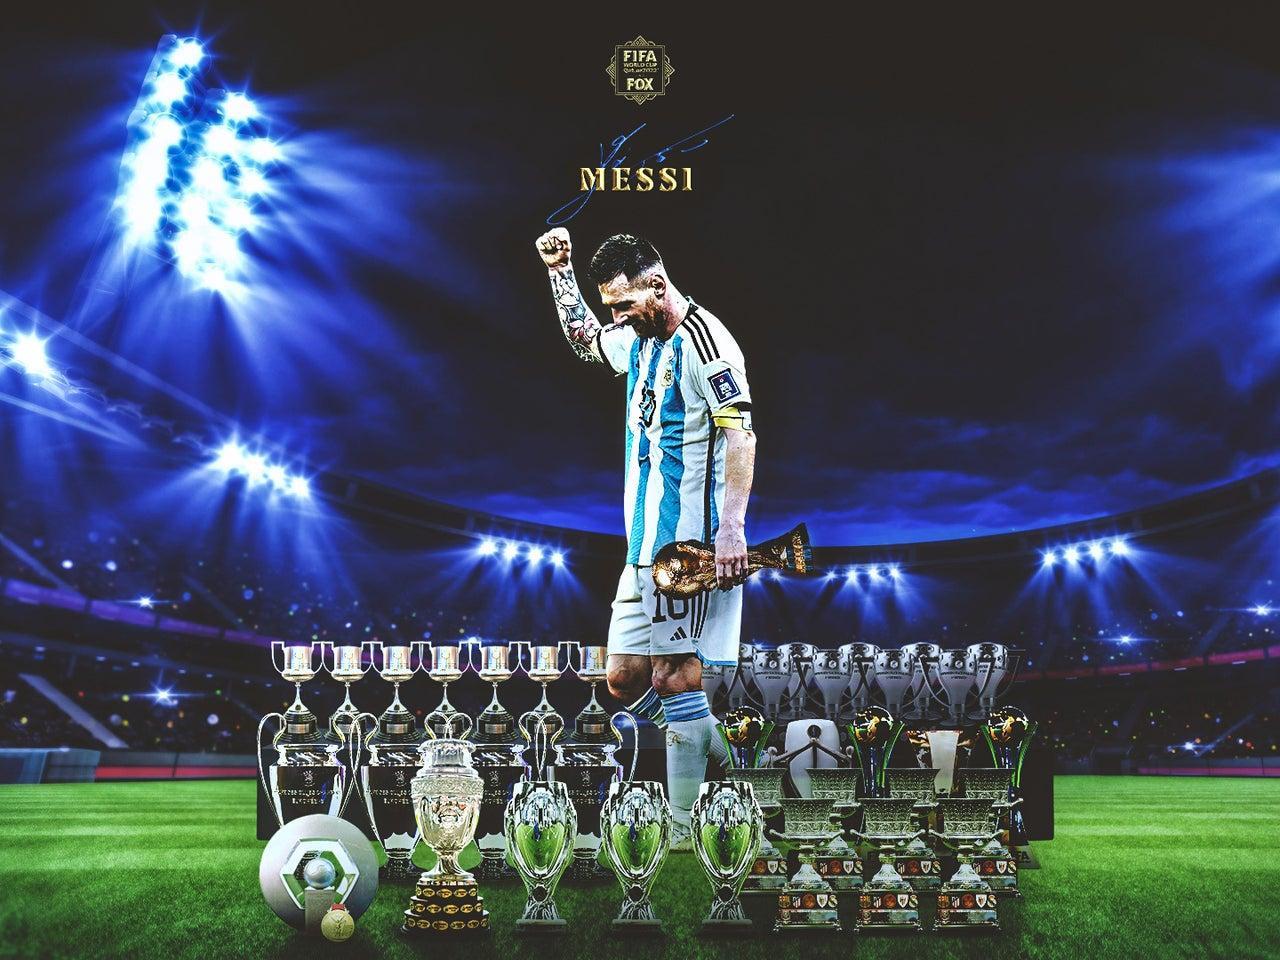 Lionel Messi World Cup Wallpapers Top Free Lionel Messi World Cup Backgrounds Wallpaperaccess 0120